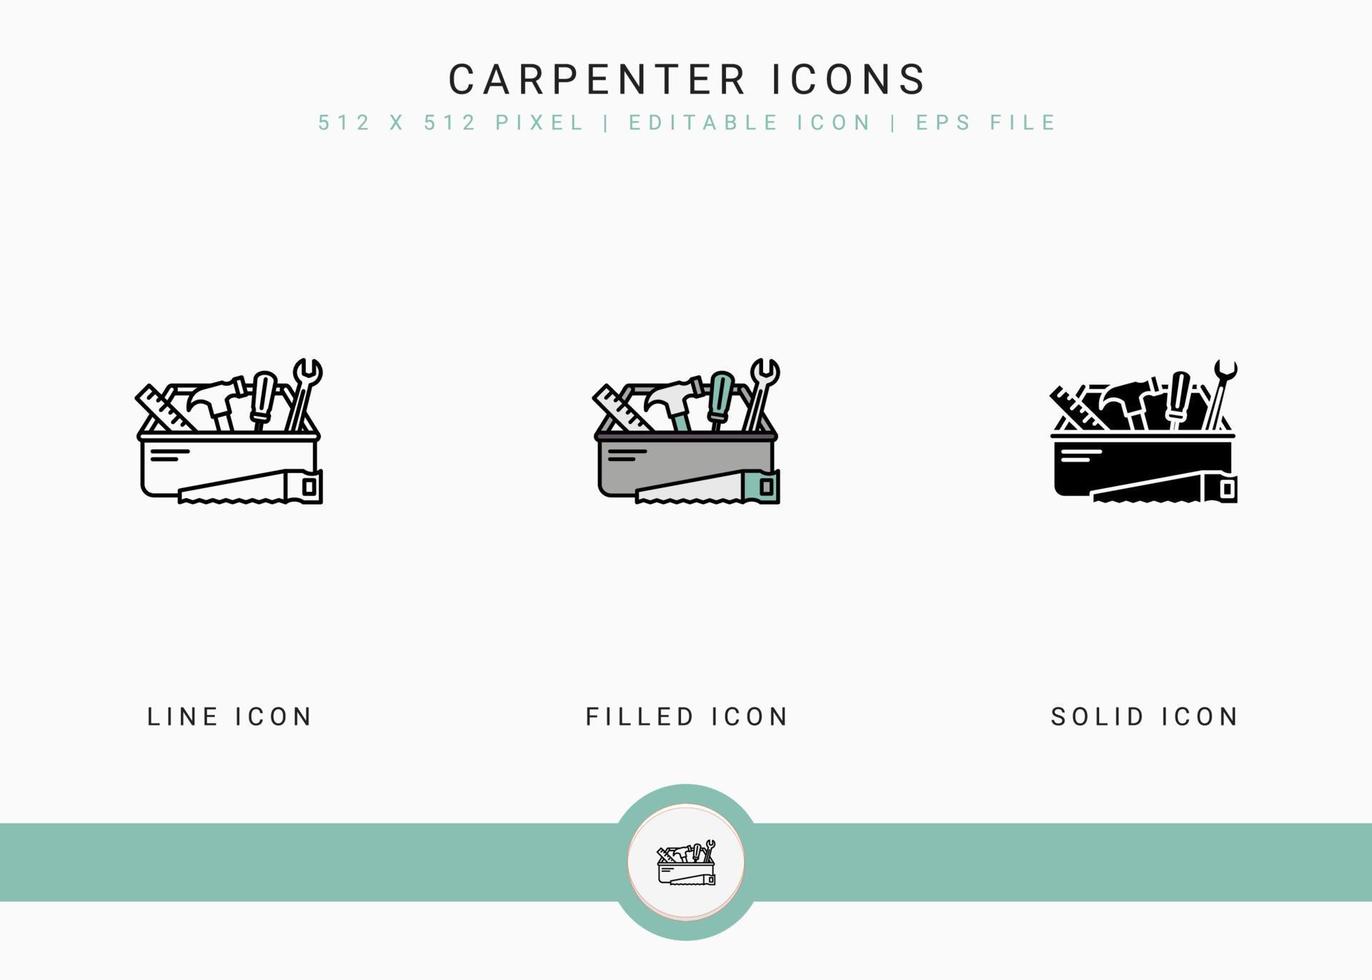 Carpenter icons set vector illustration with solid icon line style. Hammer tool building concept. Editable stroke icon on isolated background for web design, user interface, and mobile application